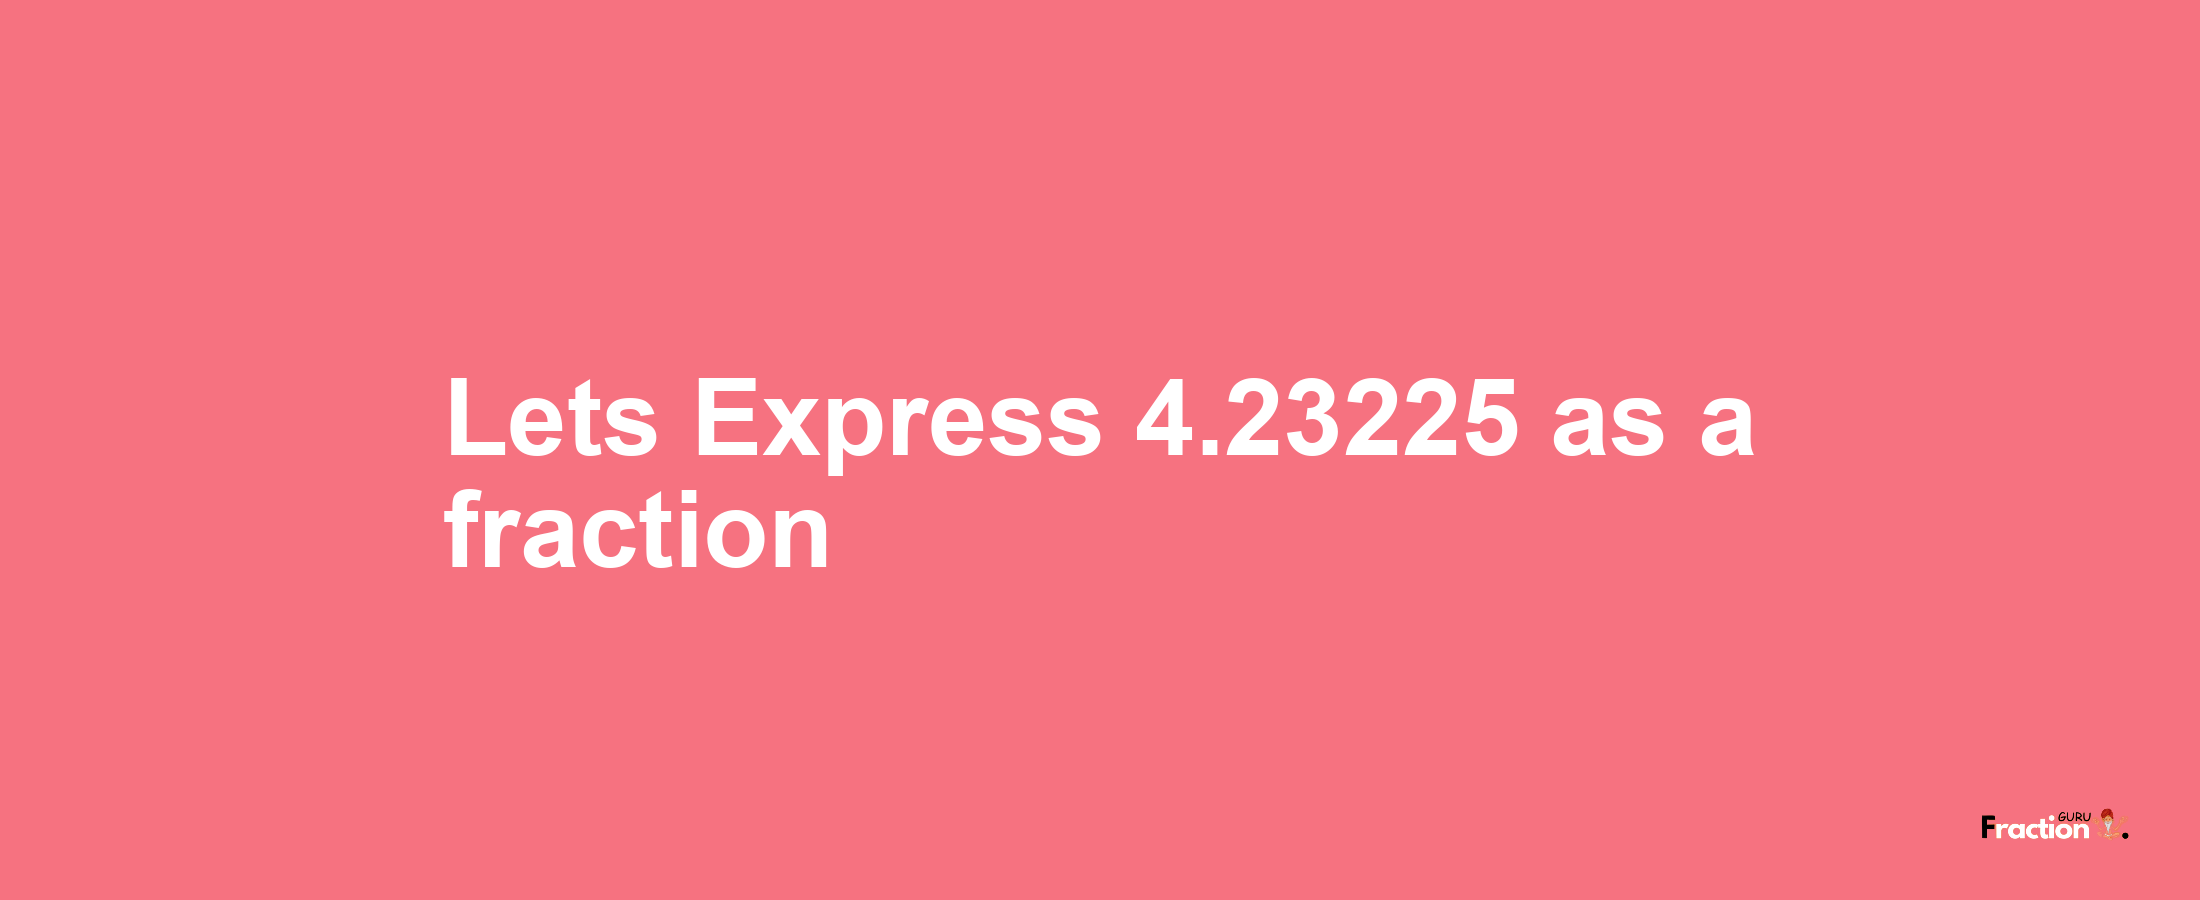 Lets Express 4.23225 as afraction